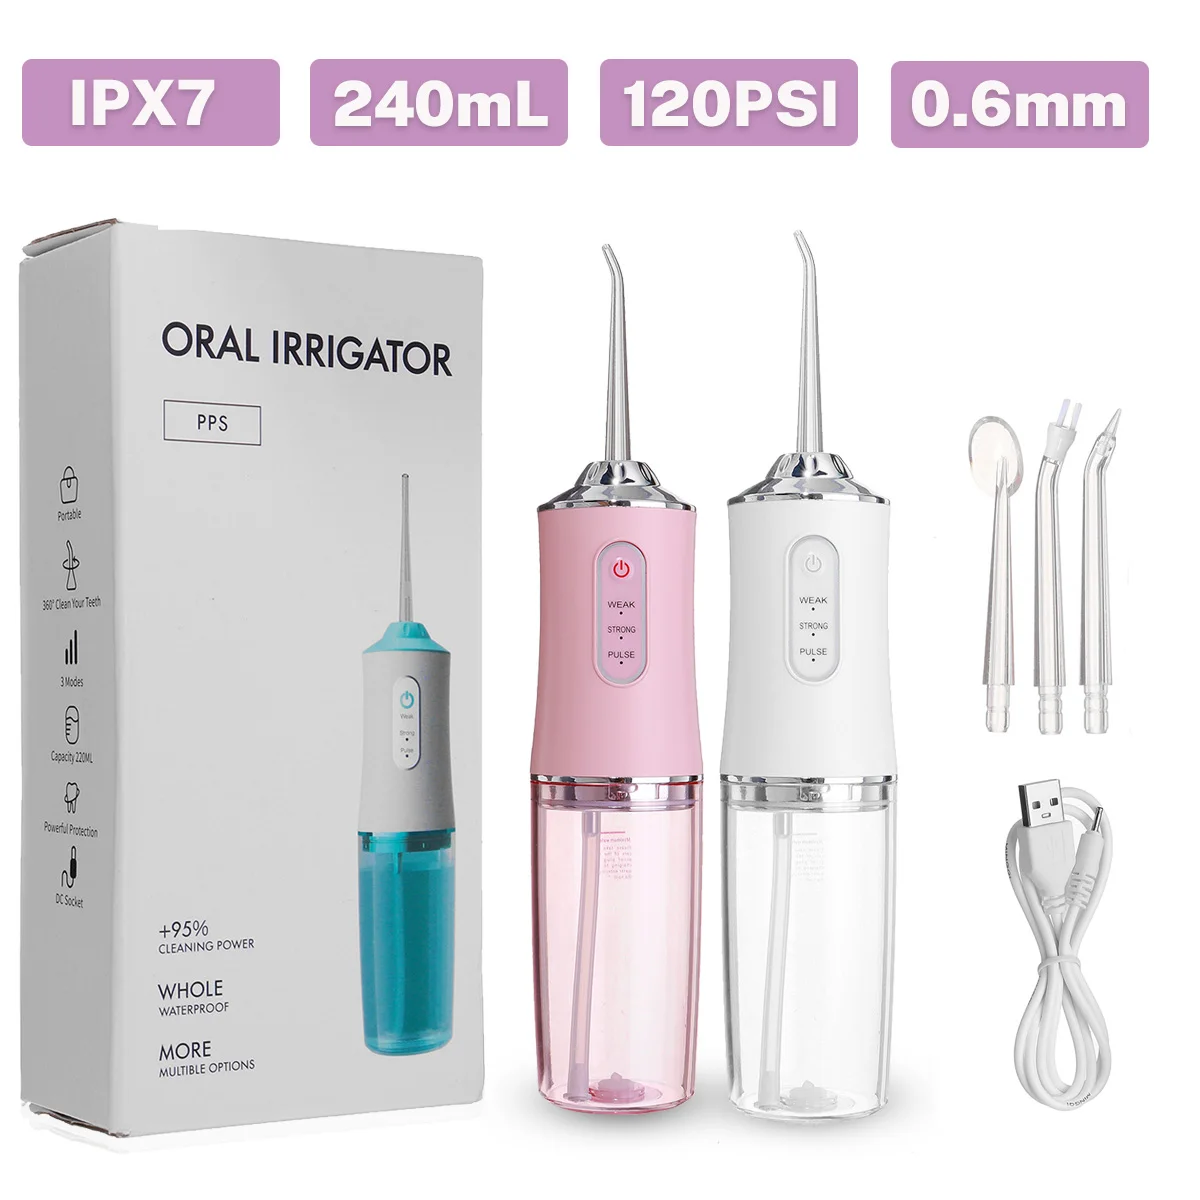 

Oral Irrigator Portable Dental Water Flosser USB Rechargeable Water Jet Floss Tooth Pick 4 Jet Tip 240ml 3 Modes IPX7 0.6mm